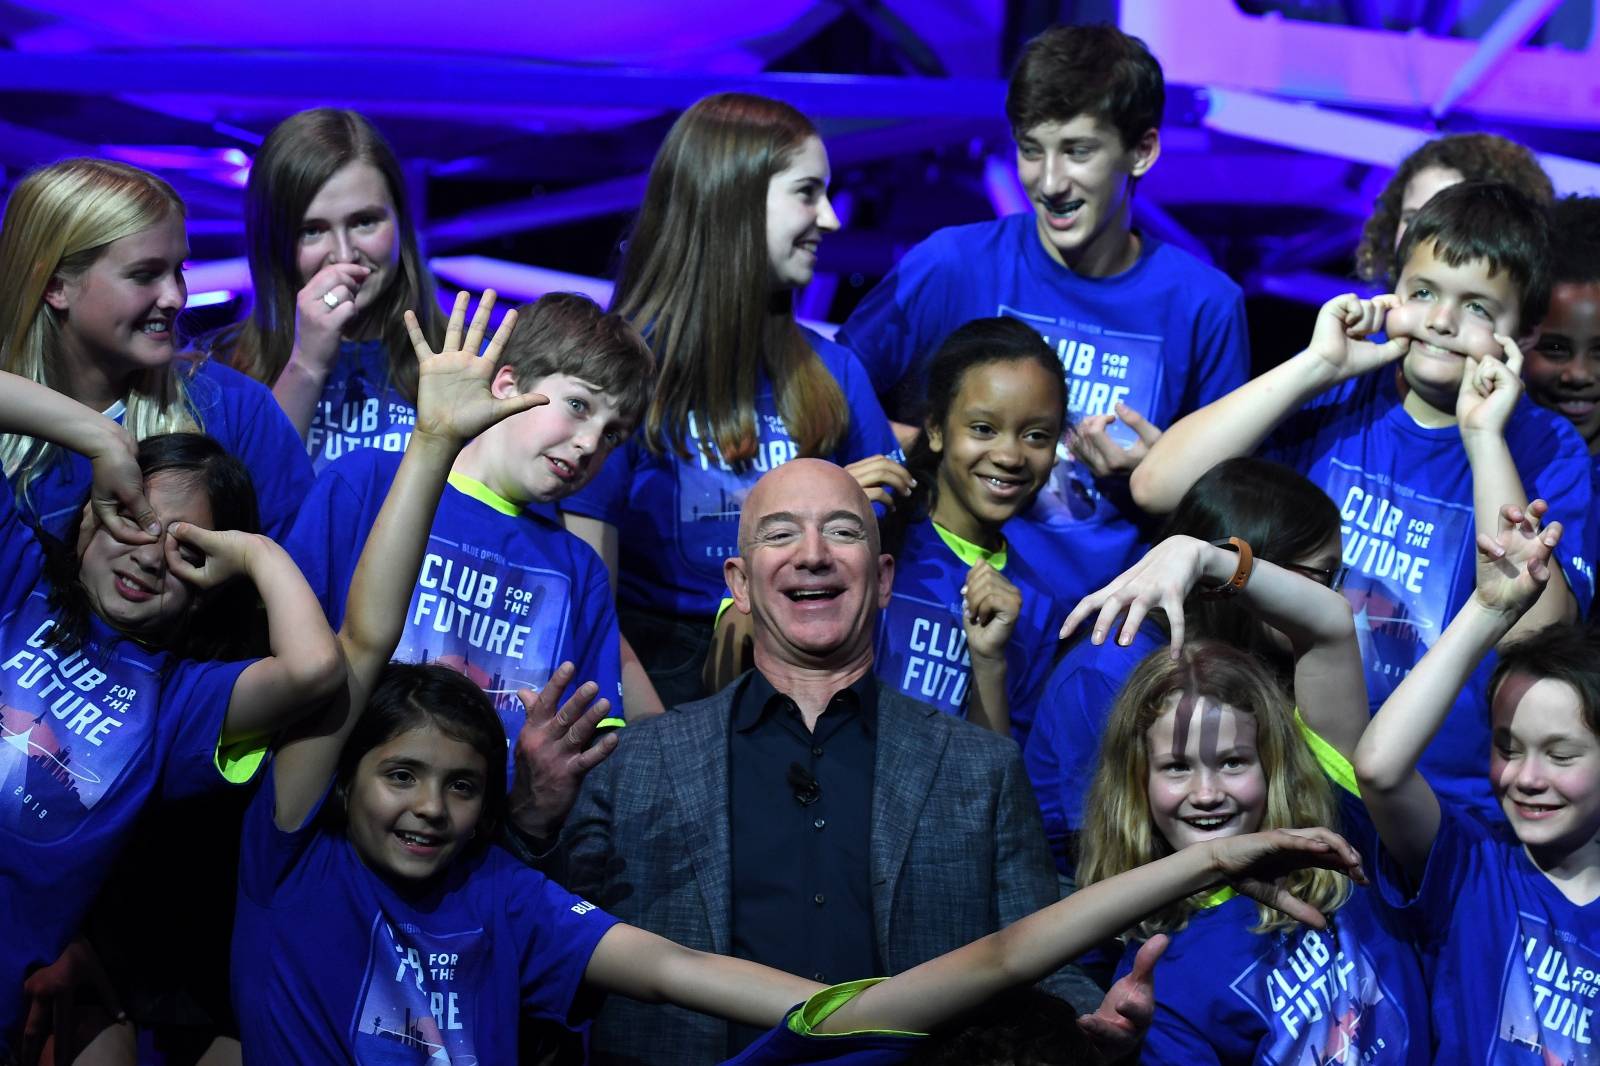 Founder, Chairman, CEO and President of Amazon Jeff Bezos poses with children from 'Club for the Future' after his space company Blue Origin's space exploration lunar lander rocket called Blue Moon was unveiled at an event in Washington